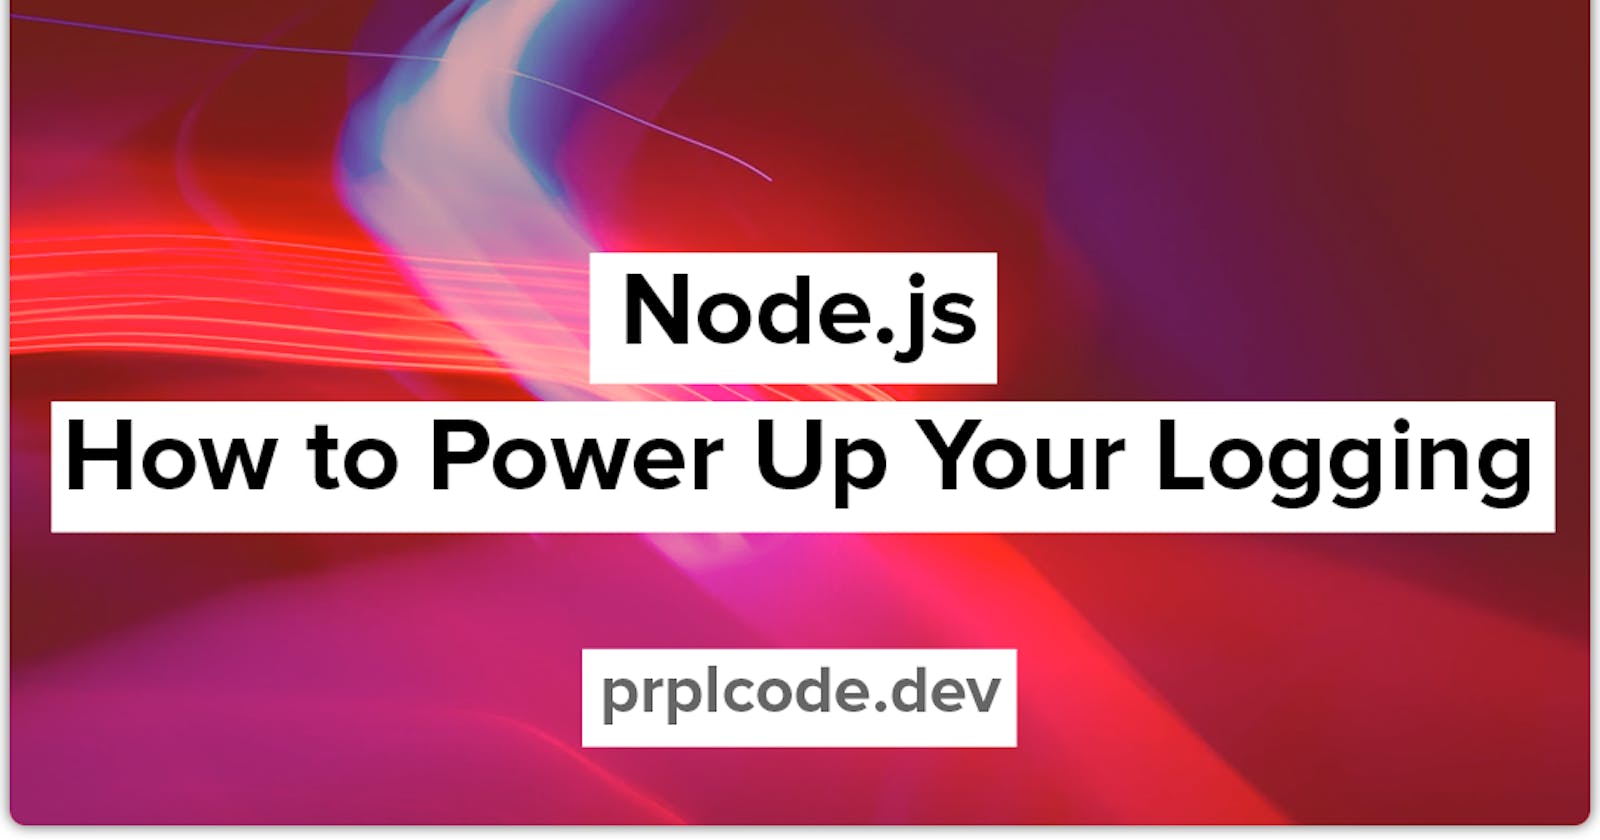 Node.js: How to Power Up Your Logging